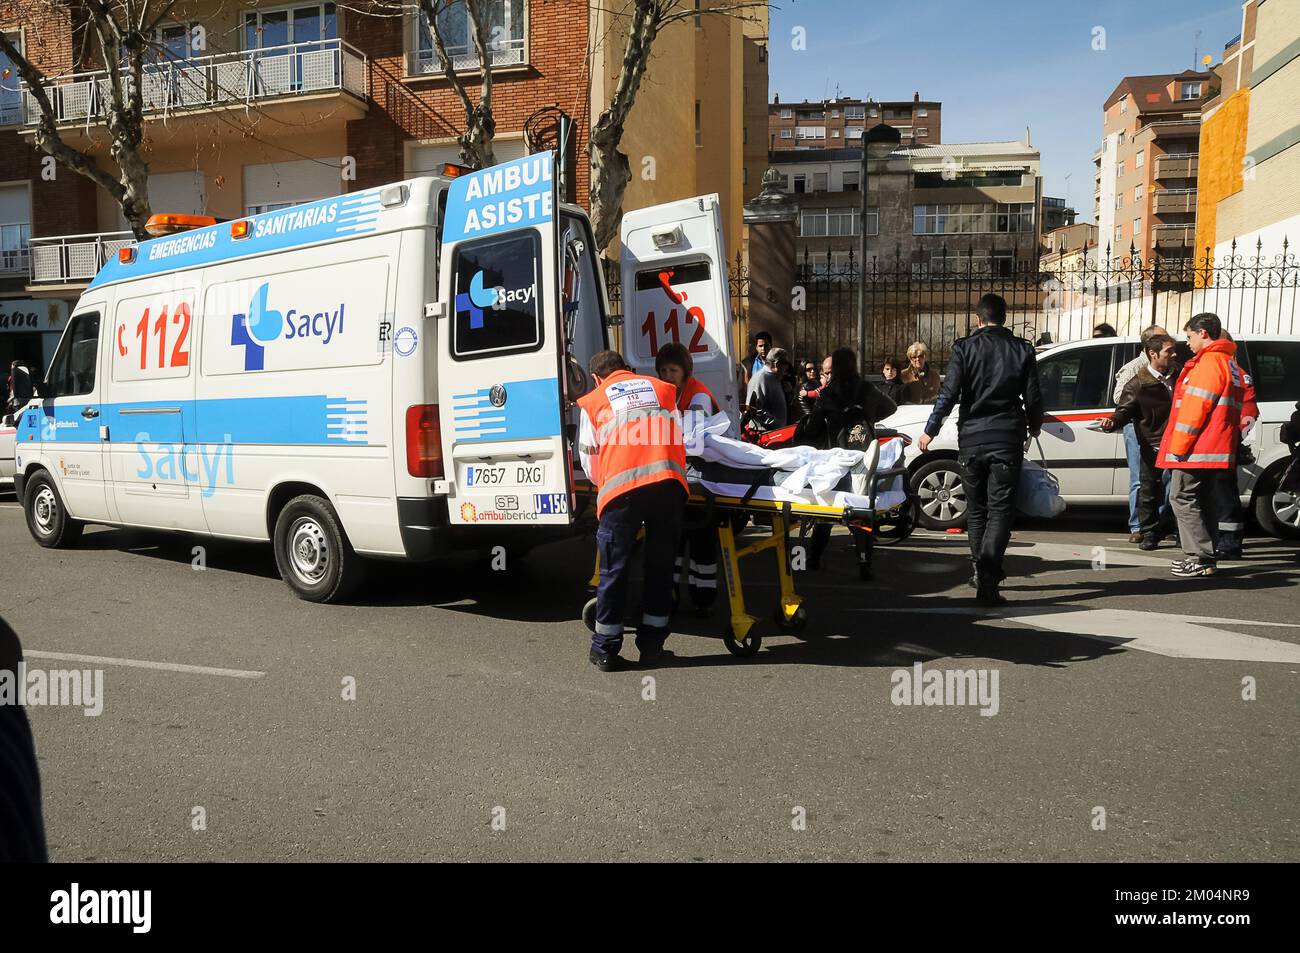 Ambulance being loaded with an injured person from a traffic accident on a city road. Stock Photo